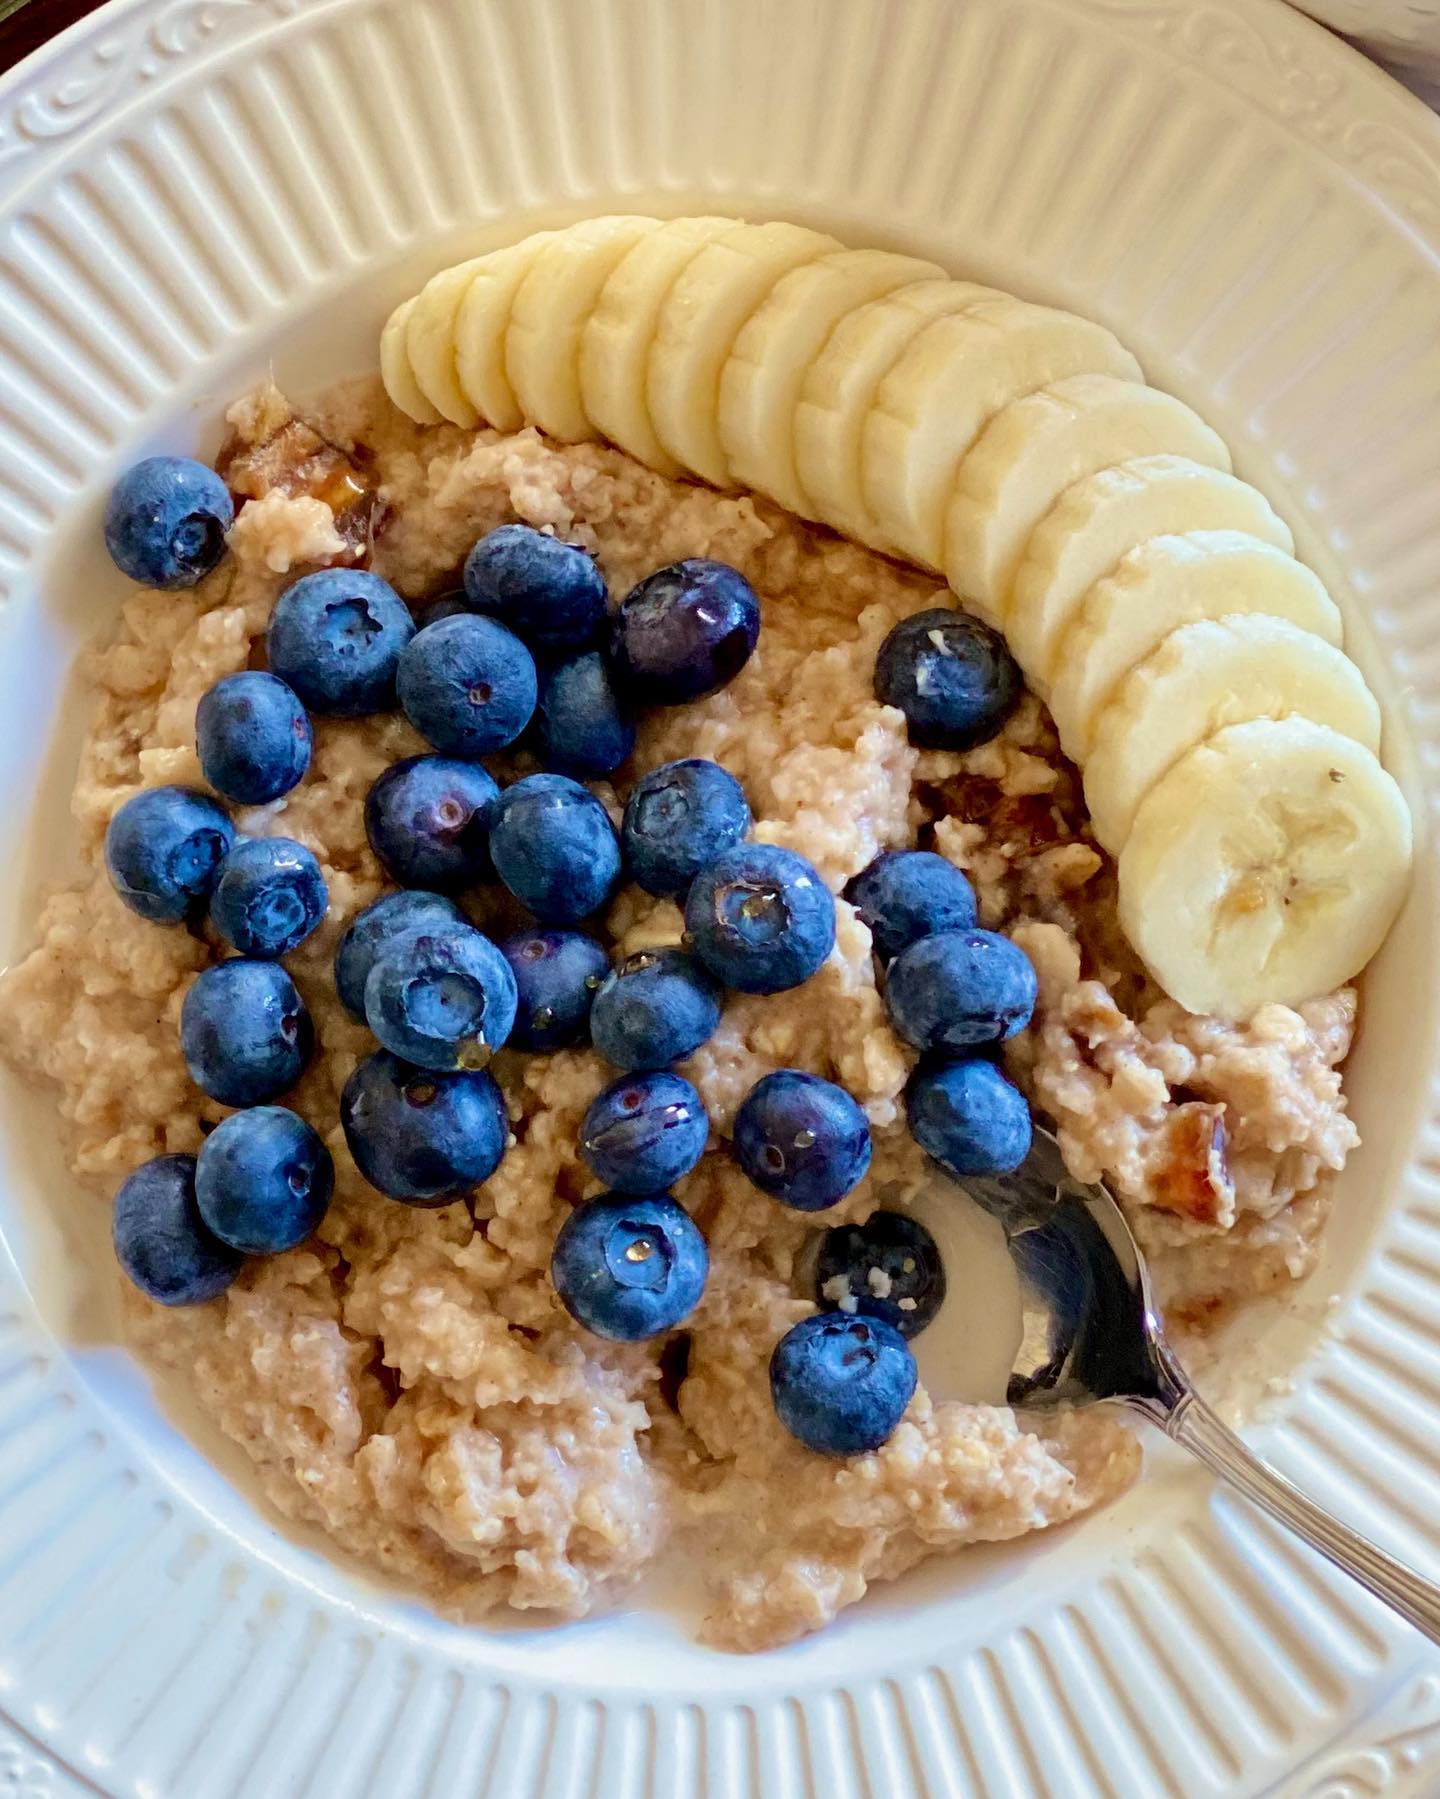 Spiced Oatmeal Bowl with Medjool Dates